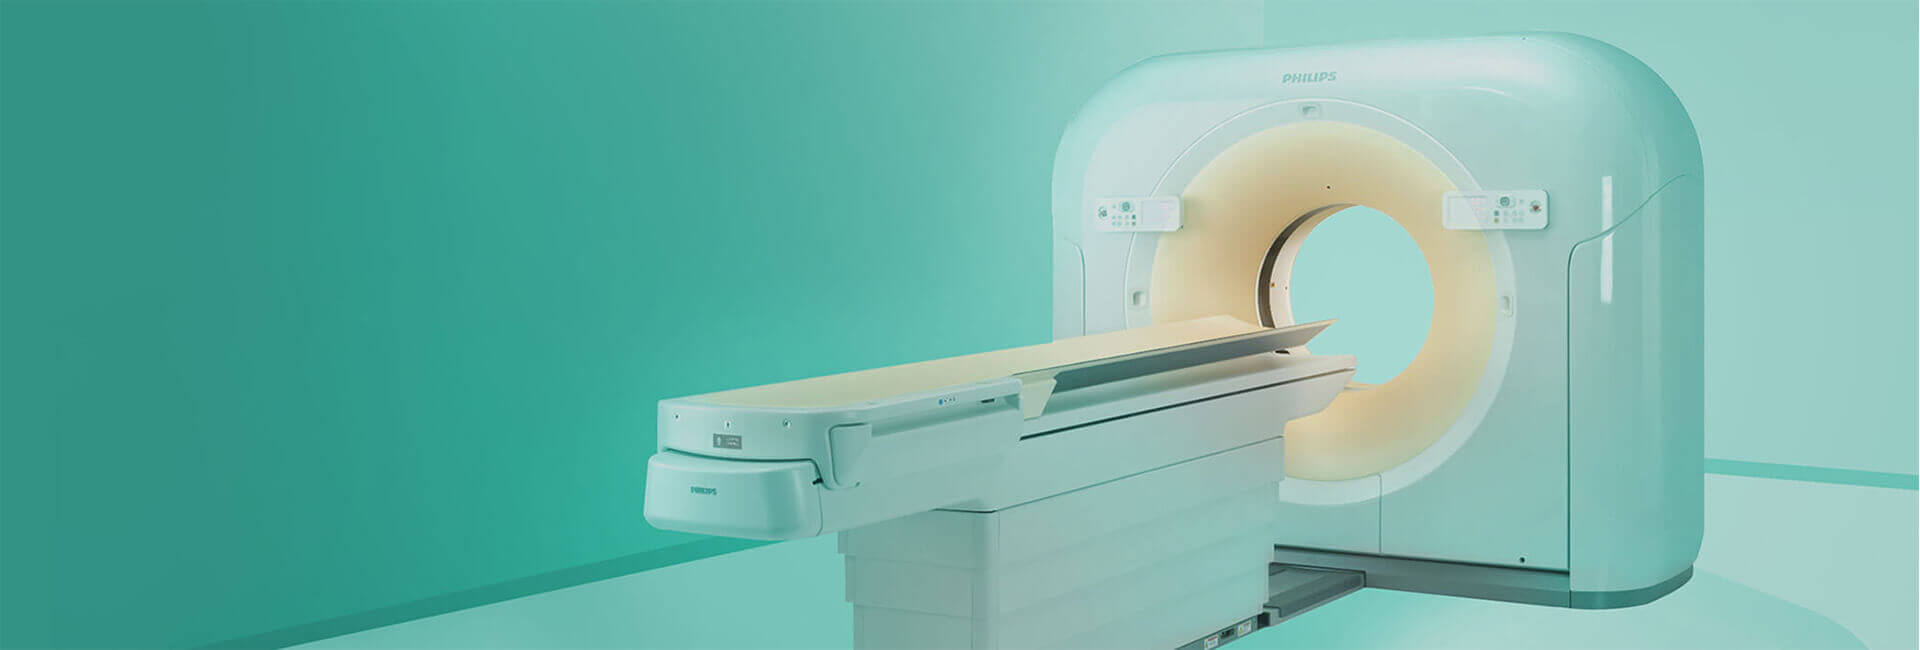 Star Imaging and Research Centre 128 slice CT Scanner